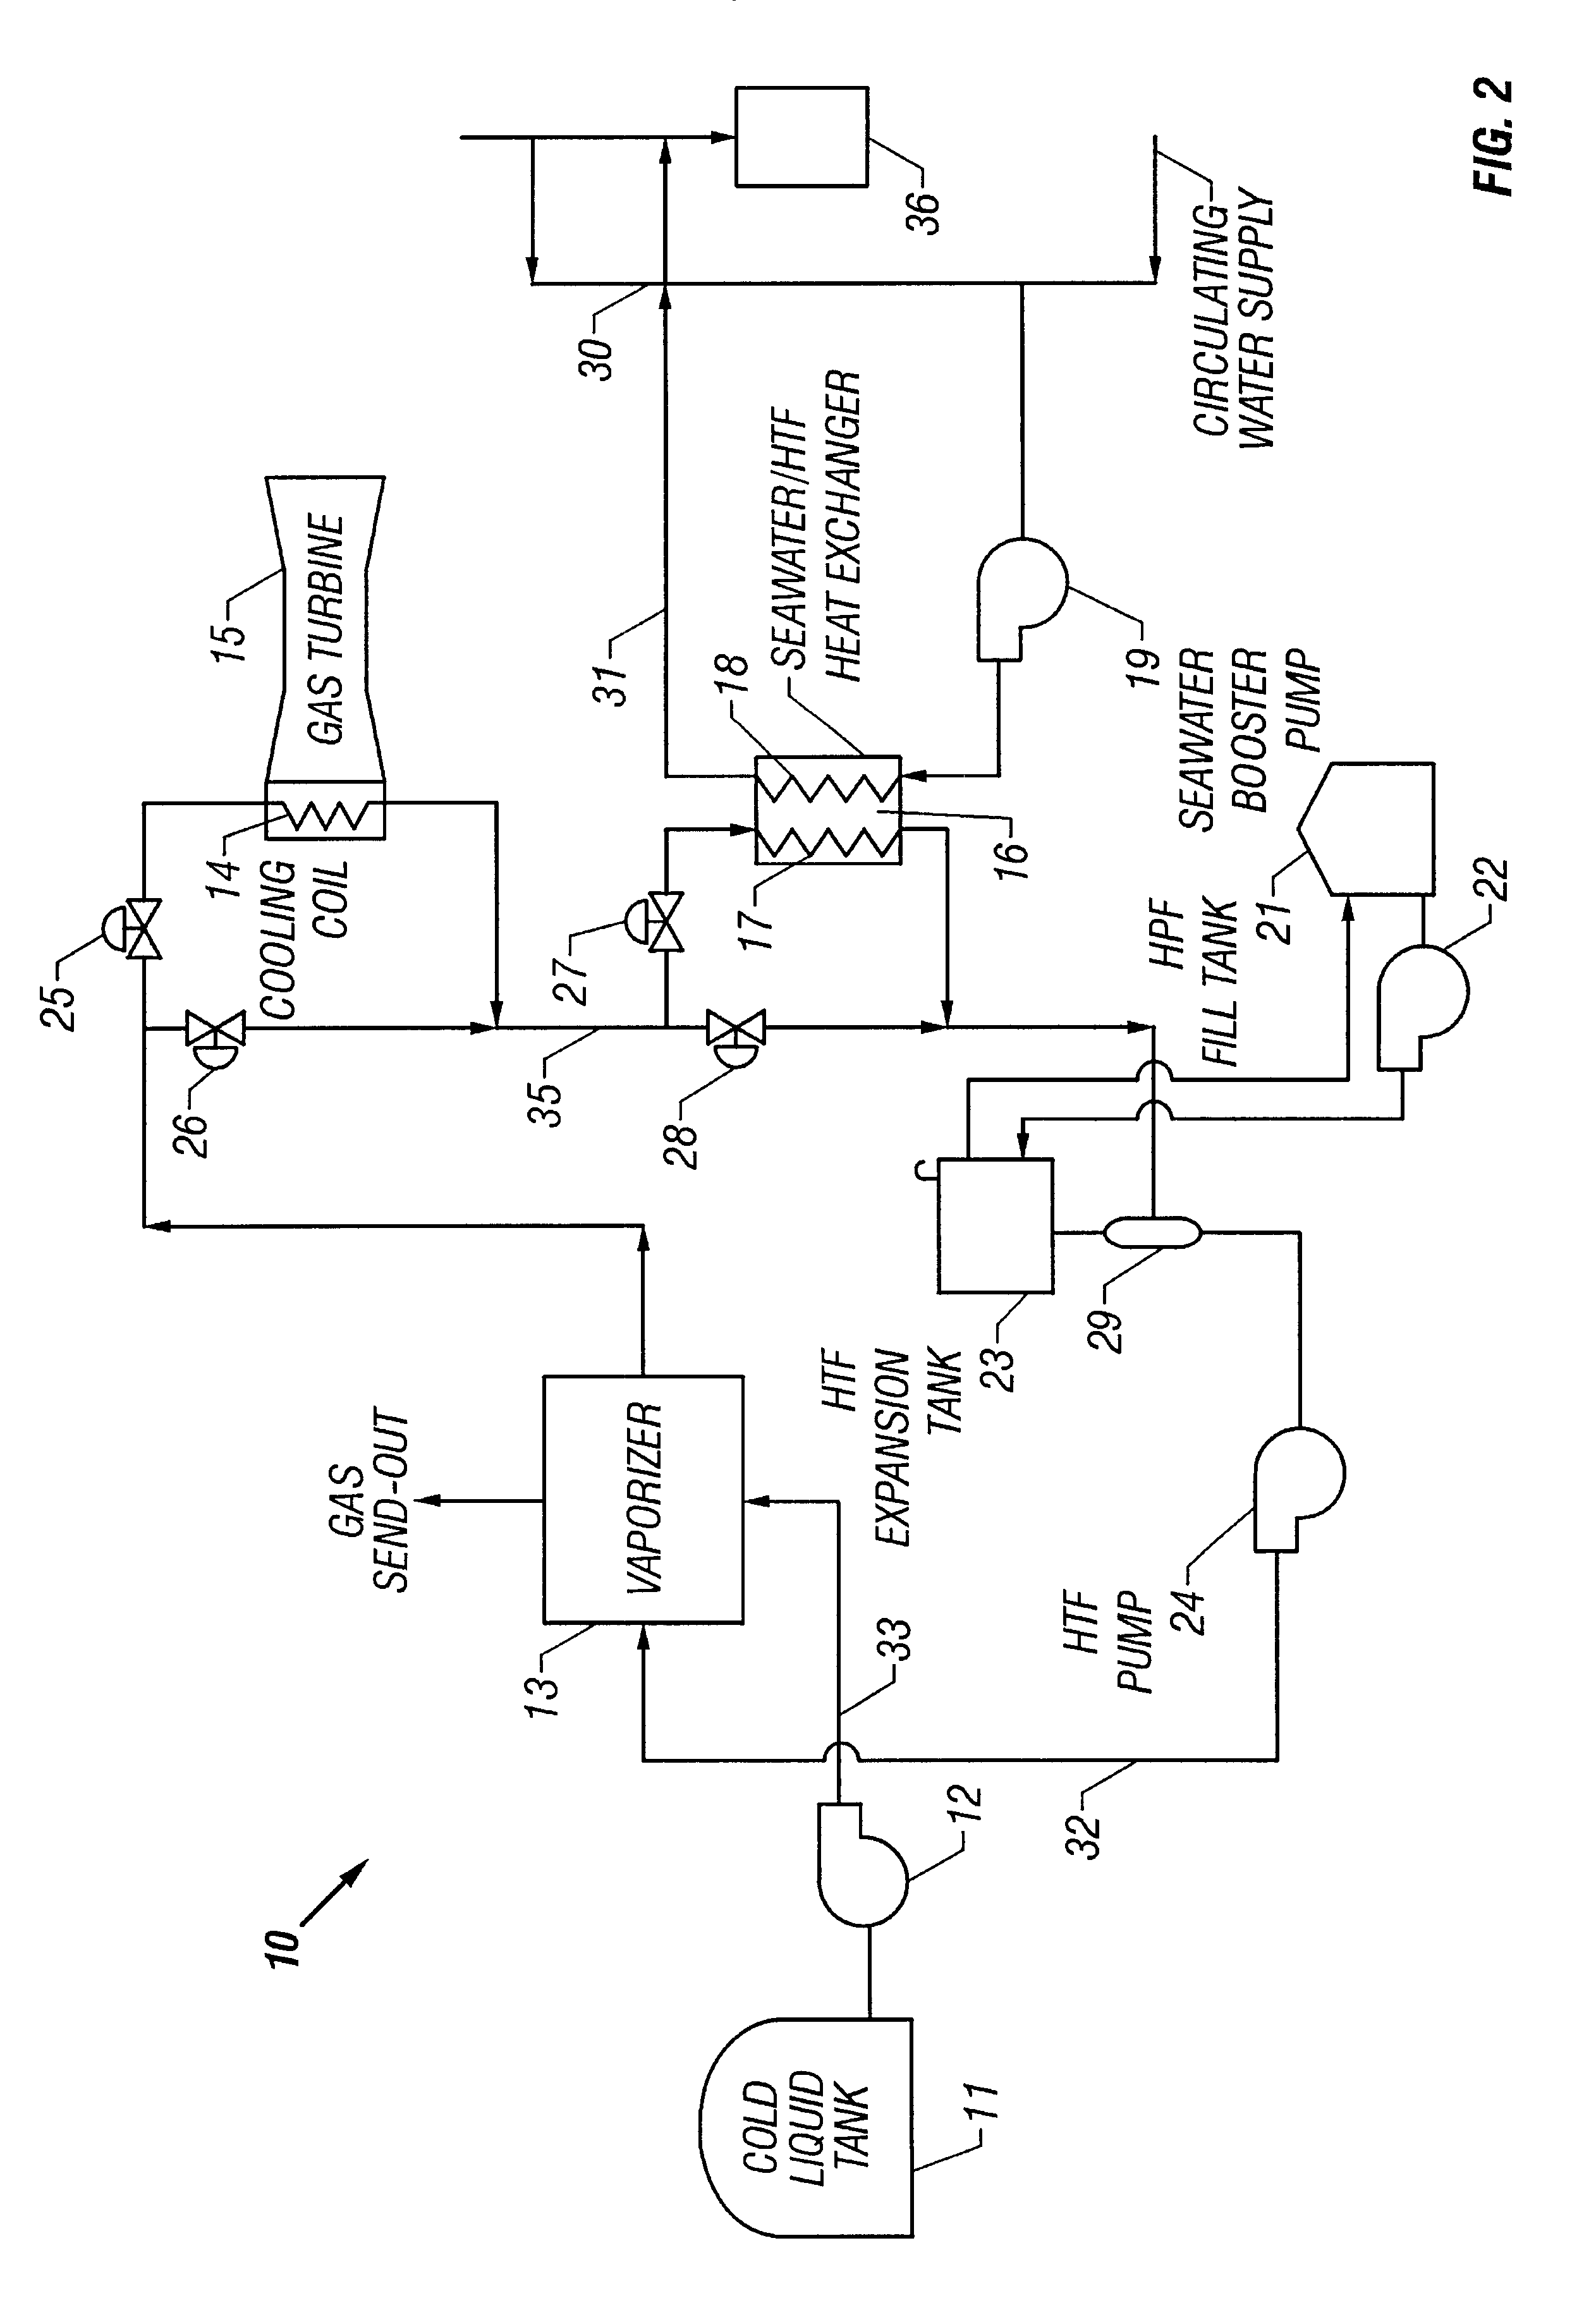 Method and apparatus for vaporizing liquid natural gas in a combined cycle power plant